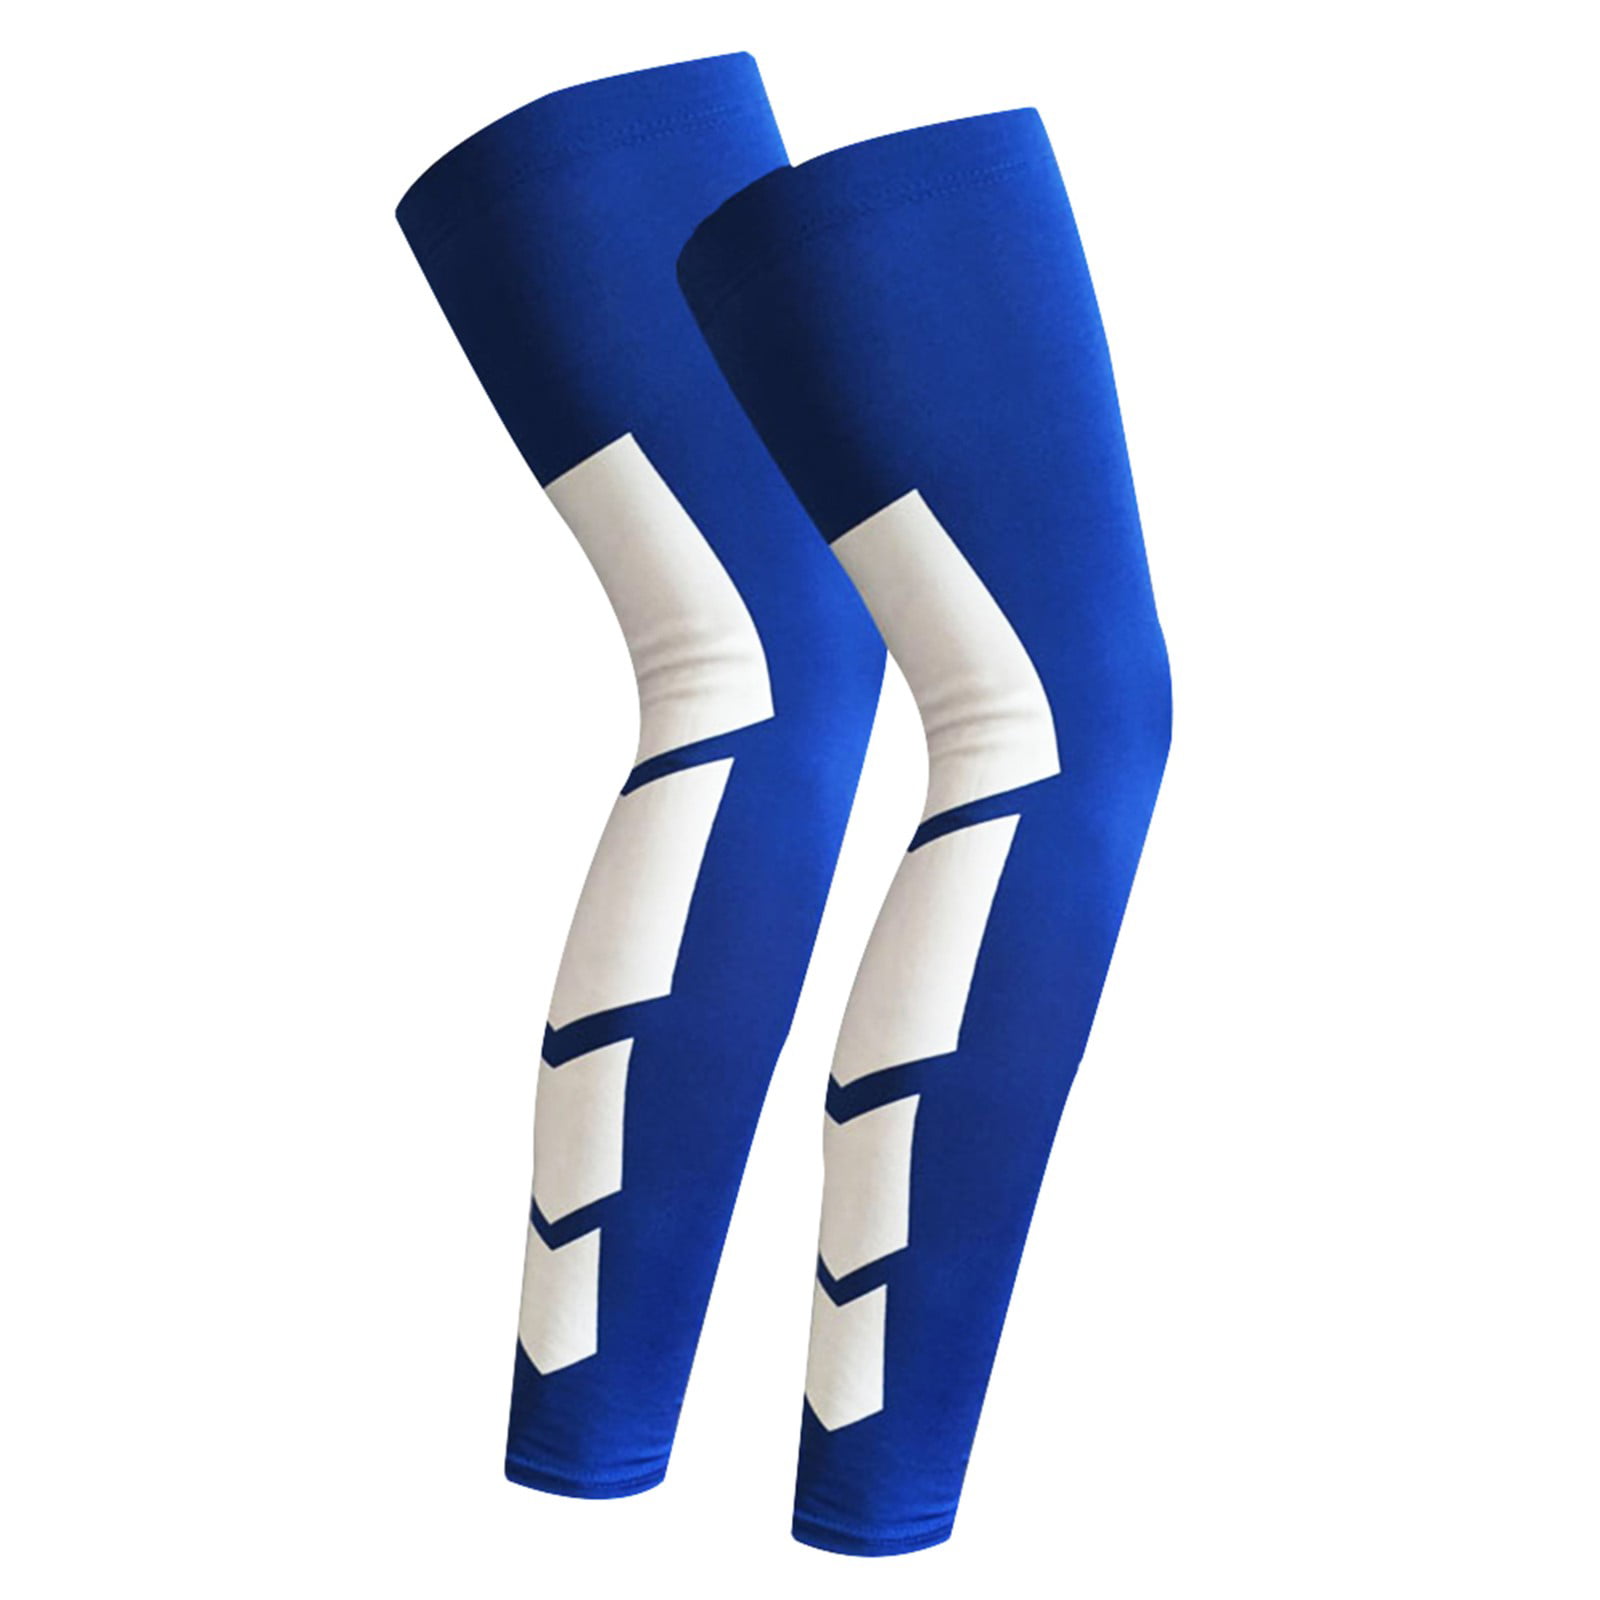 compression sleeves